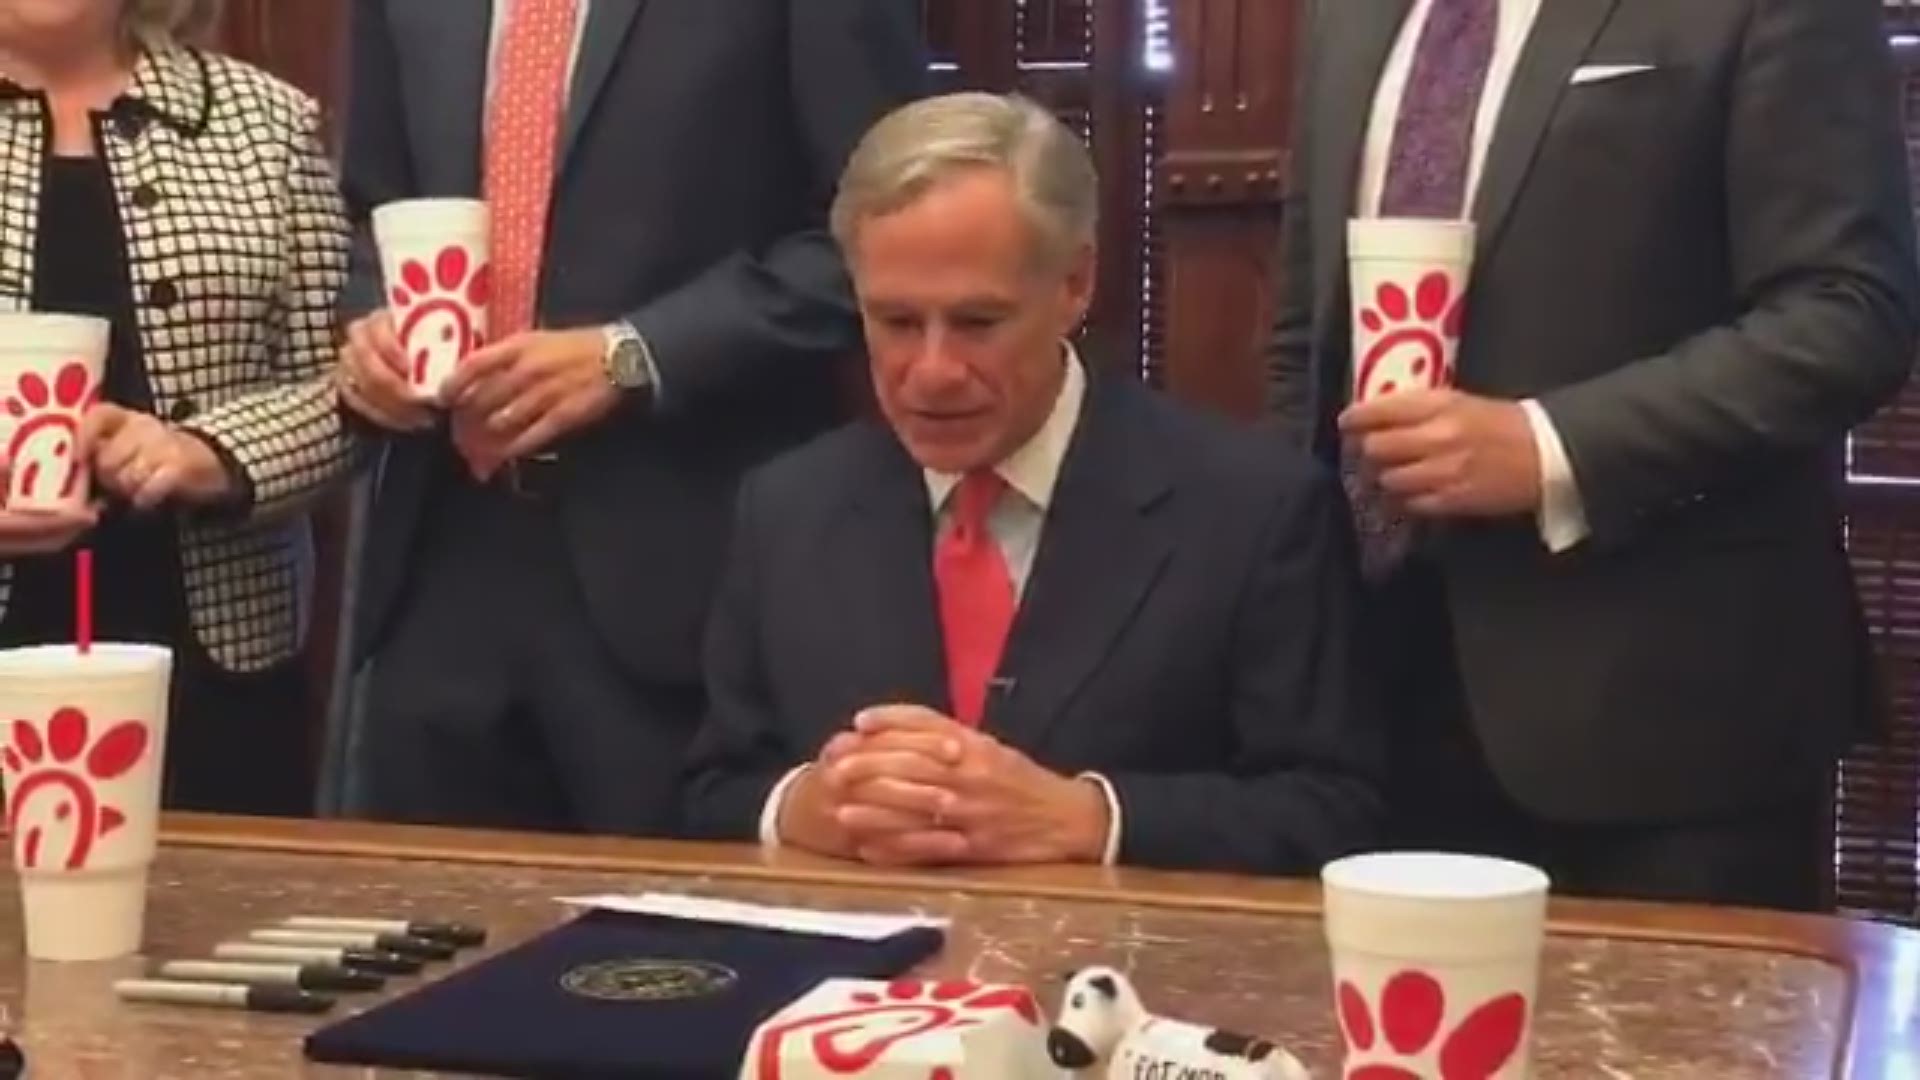 Governor Greg Abbott munched on some Chick-fil-A as he signed the so-called "Chick-fil-A"' law.